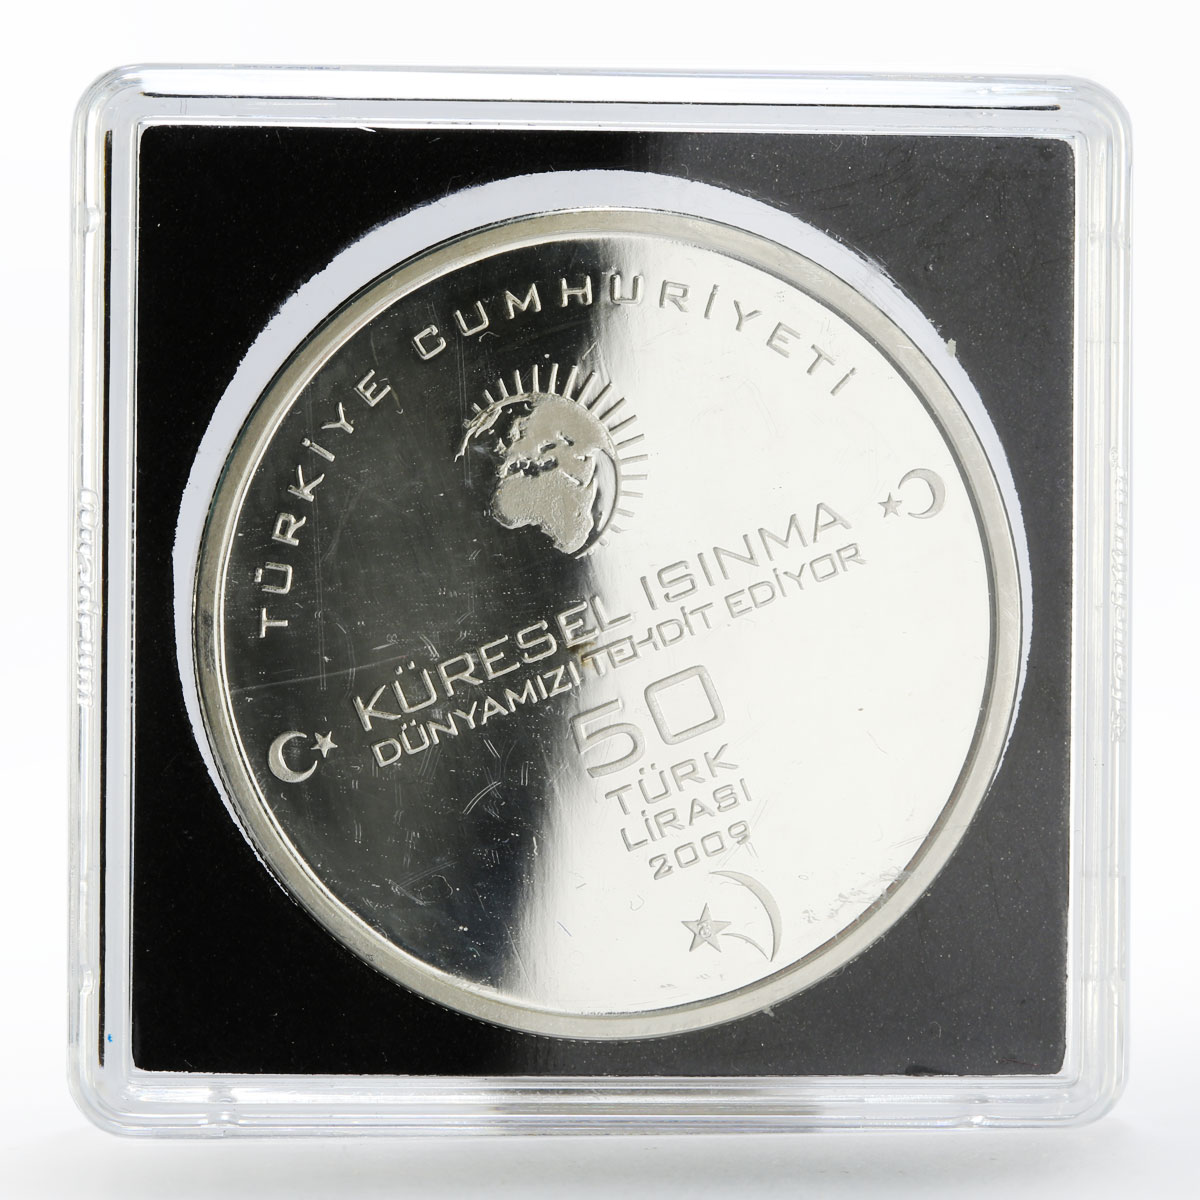 Turkey 50 lira The Problem of Water series Woman Earth proof silver coin 2009